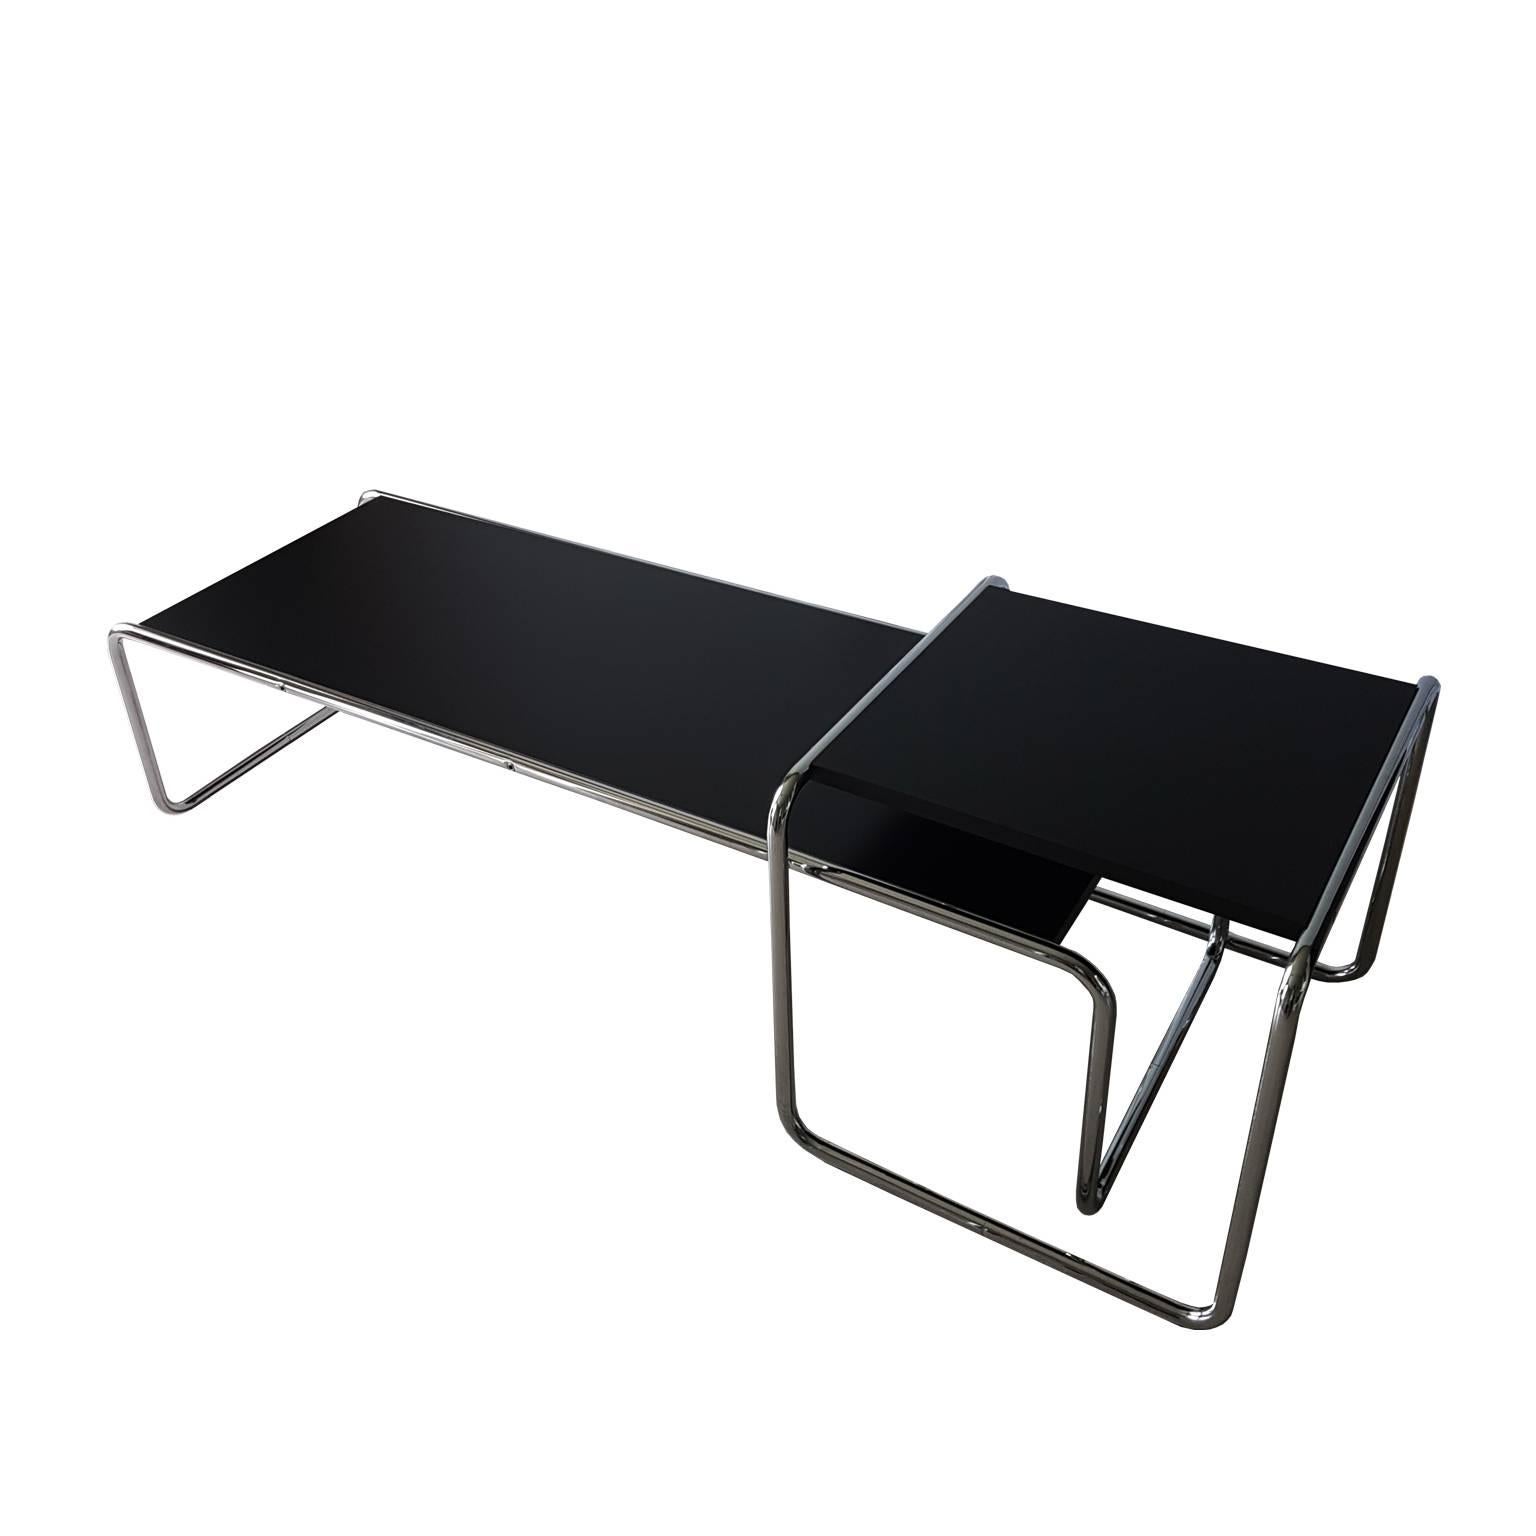 Laminated Marcel Breuer Coffee Table in Tubular Steel and Black Laminate Top Bauhaus style